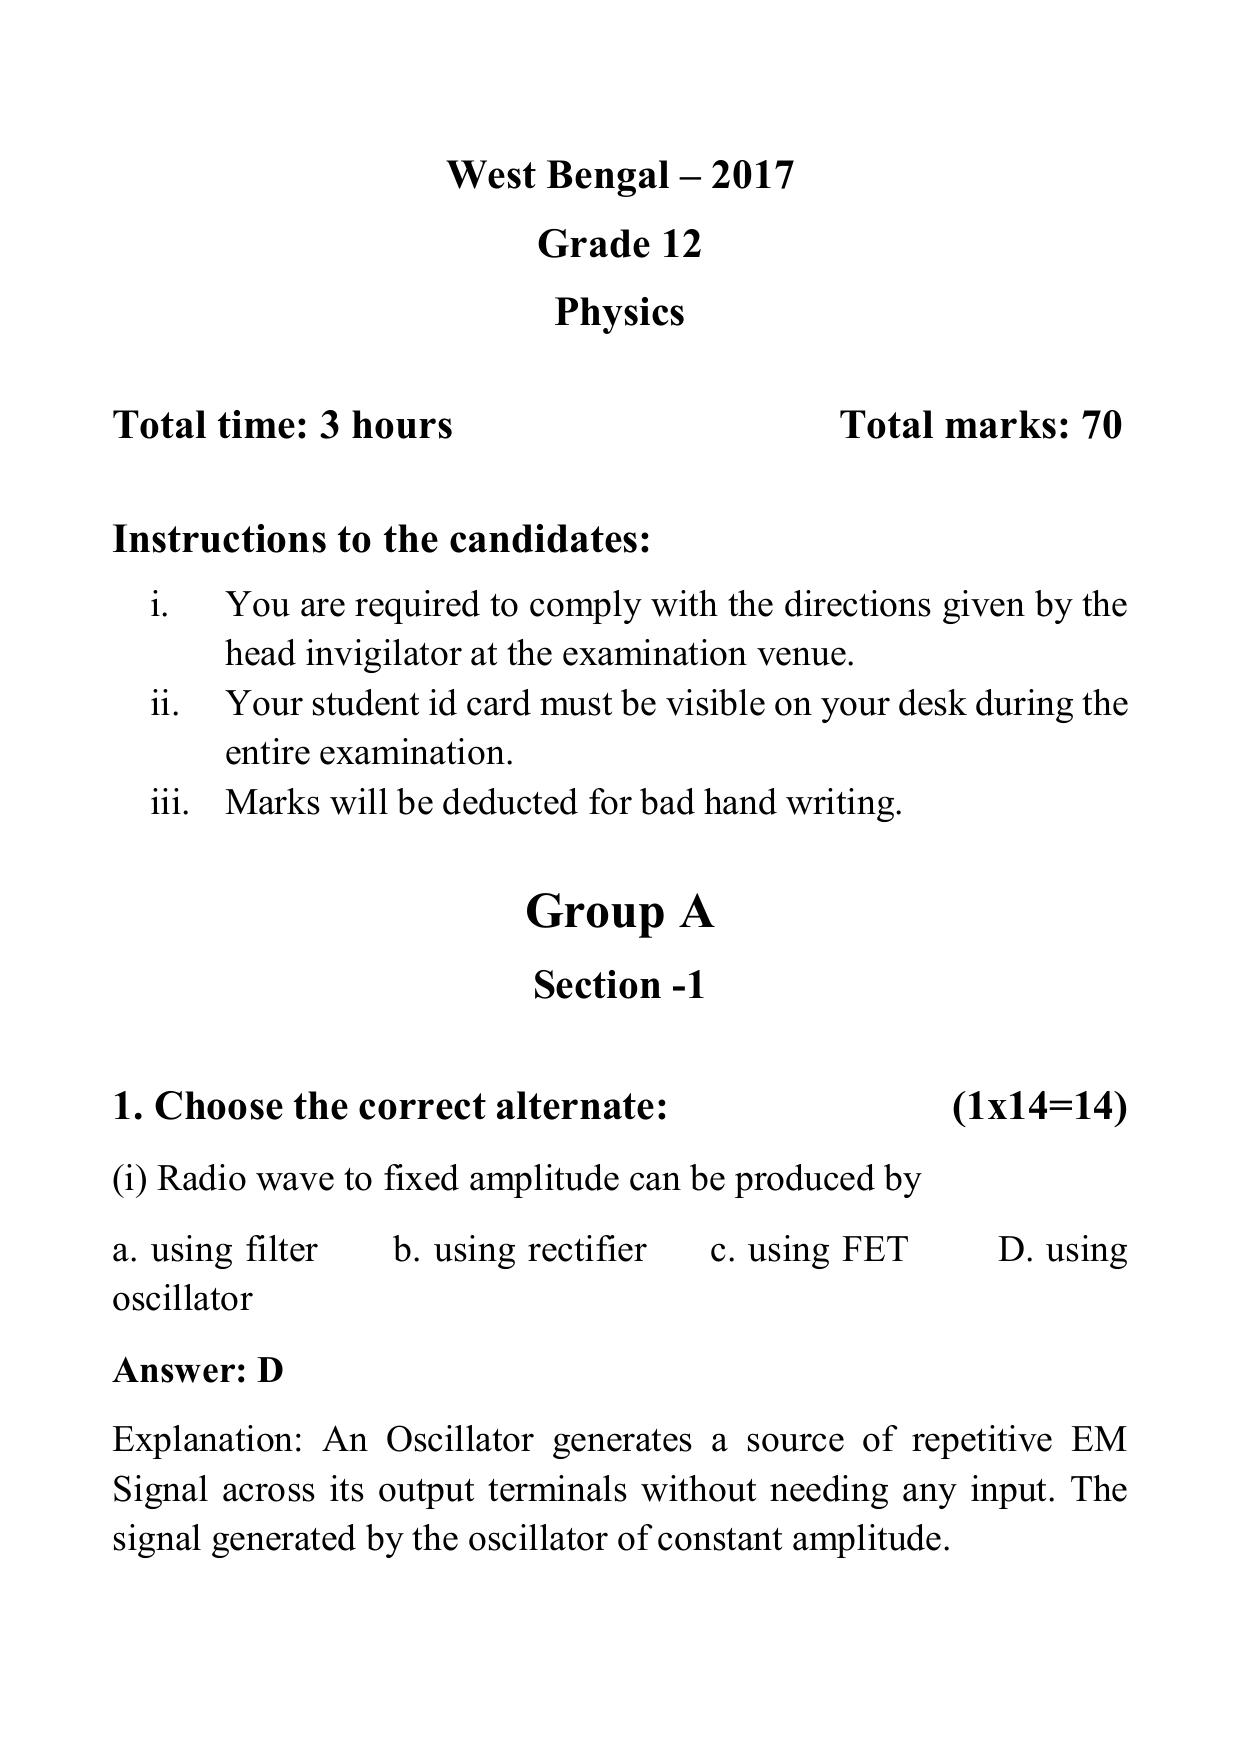 West Bengal Board Class 12 Physics 2017 Question Paper - Page 1